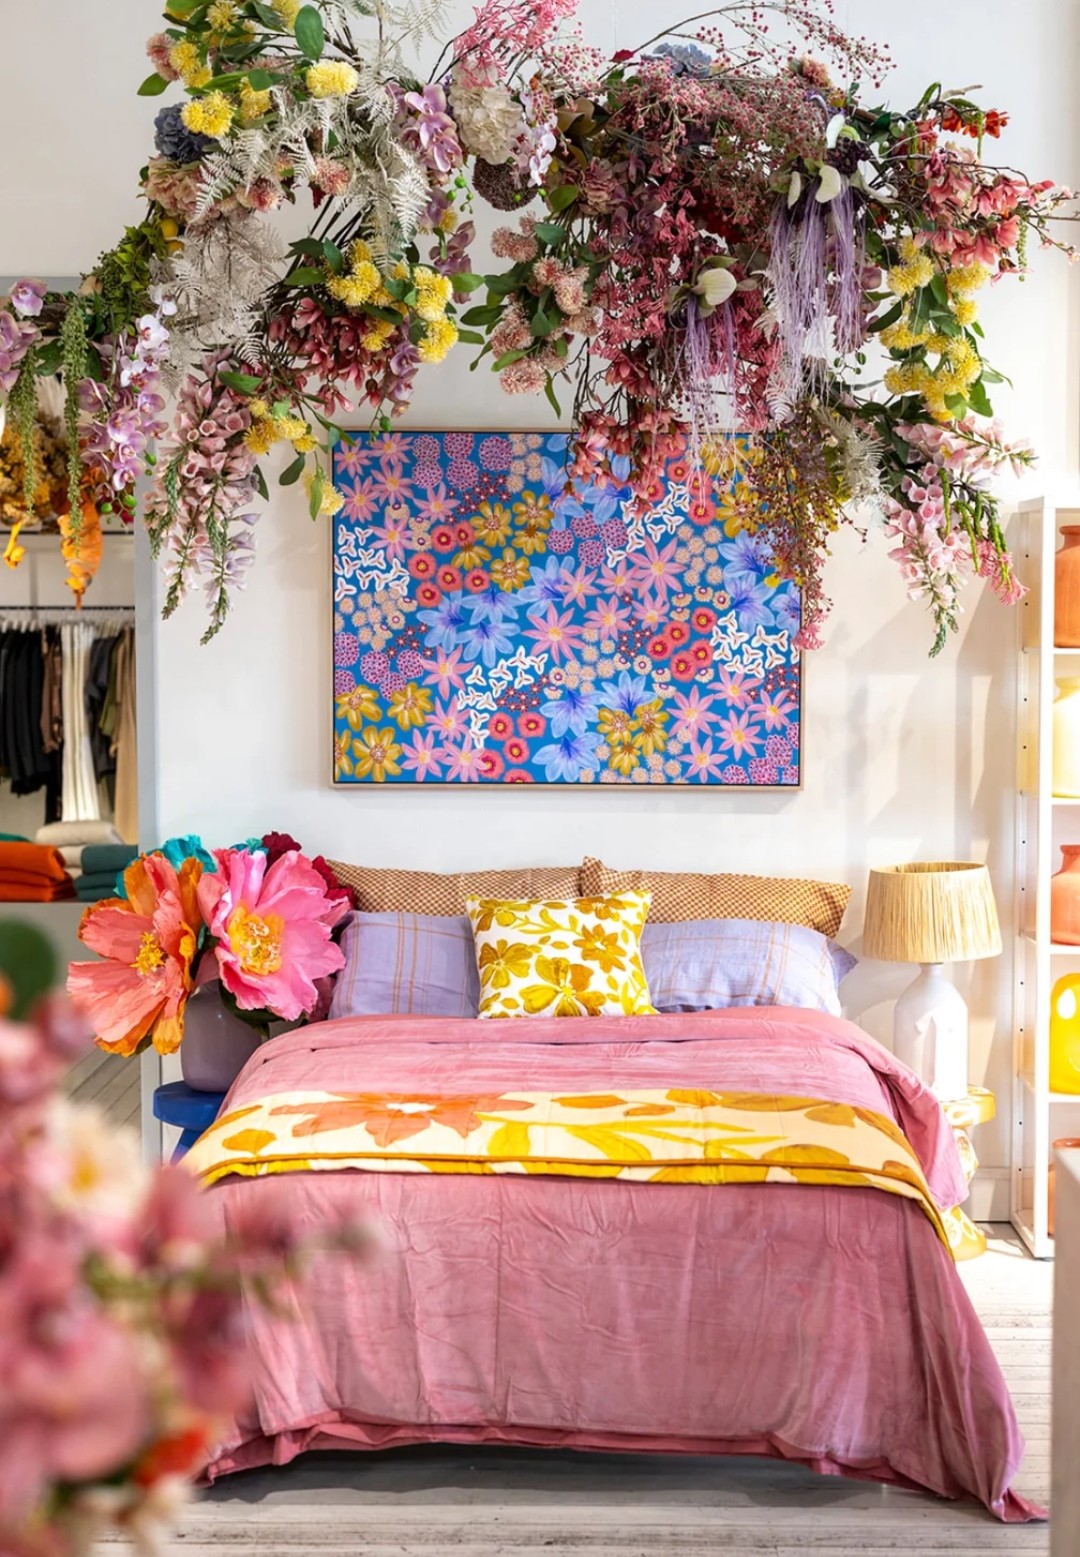 Floral artwork in colourful bedroom from Amy Gibbs